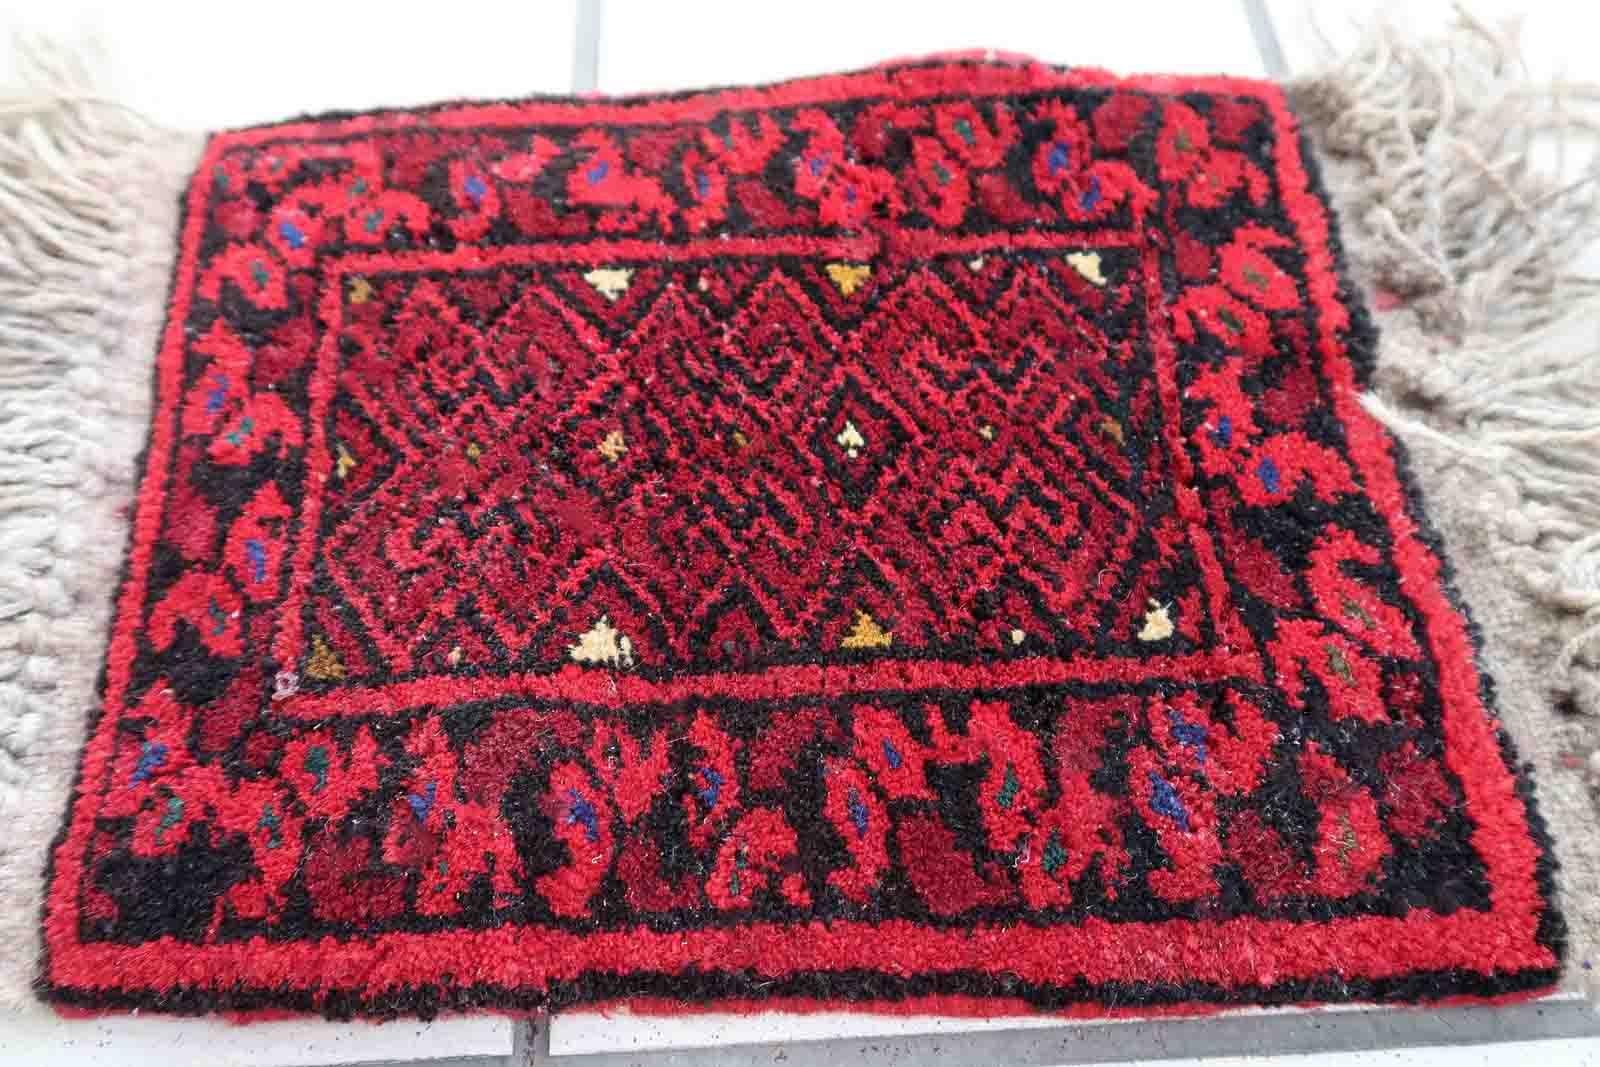 Handmade vintage Afghan Ersari mat in bright red shade. The rug is from the end of 20th century in original good condition. It can be used as a doll house rug.

-condition: original good,

-circa: 1970s,

-size: 0.7' x 0.9' (24cm x